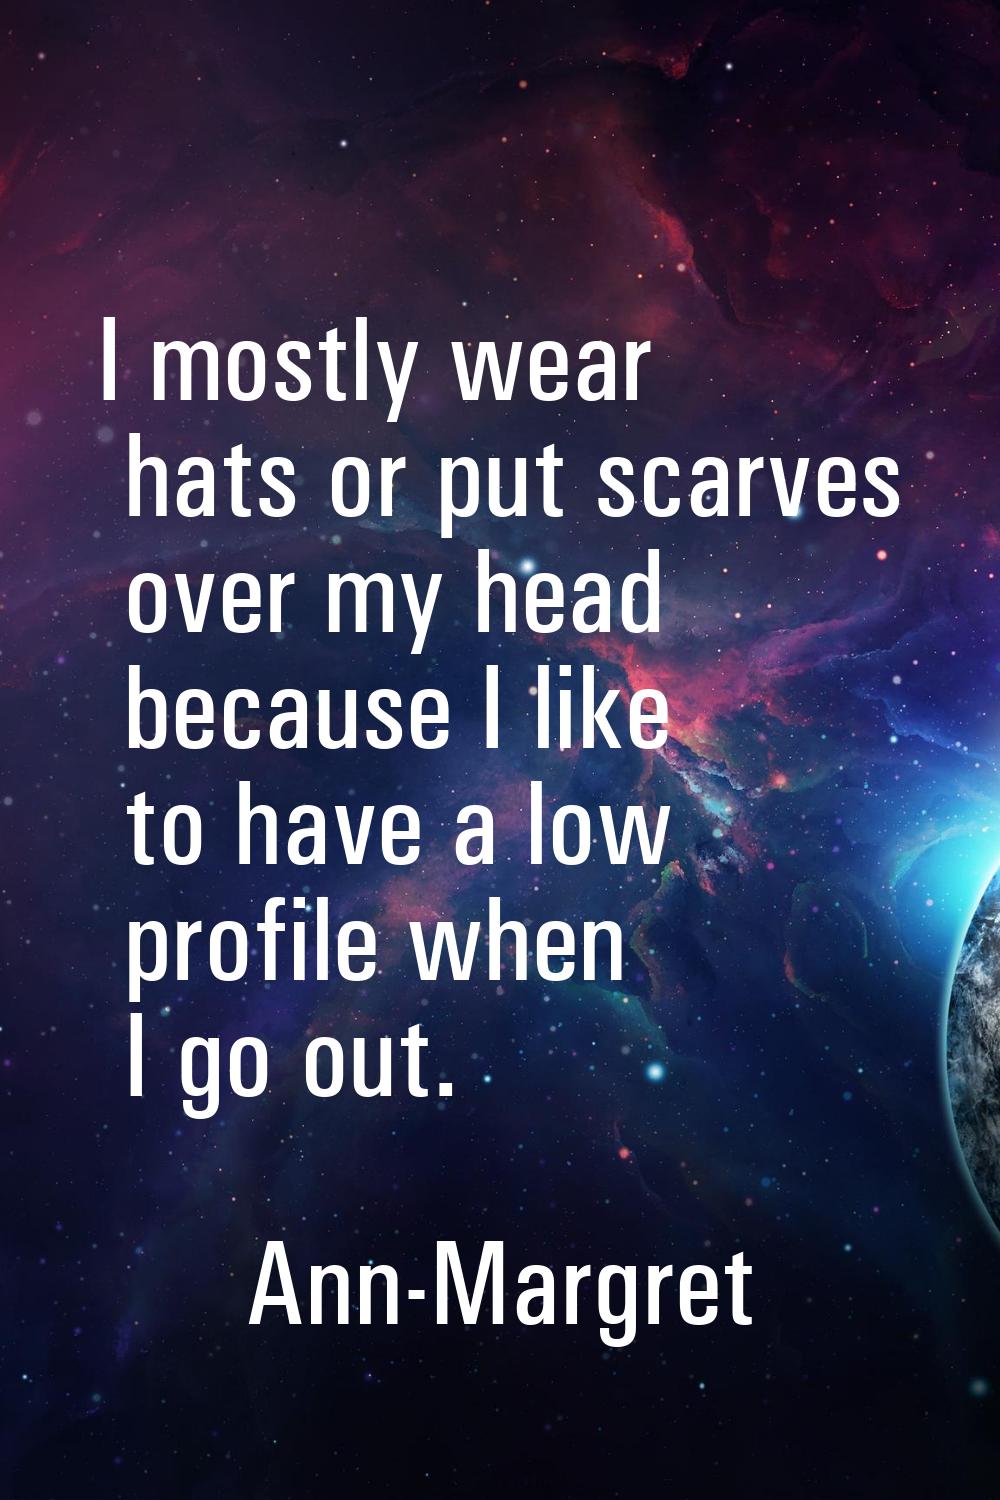 I mostly wear hats or put scarves over my head because I like to have a low profile when I go out.